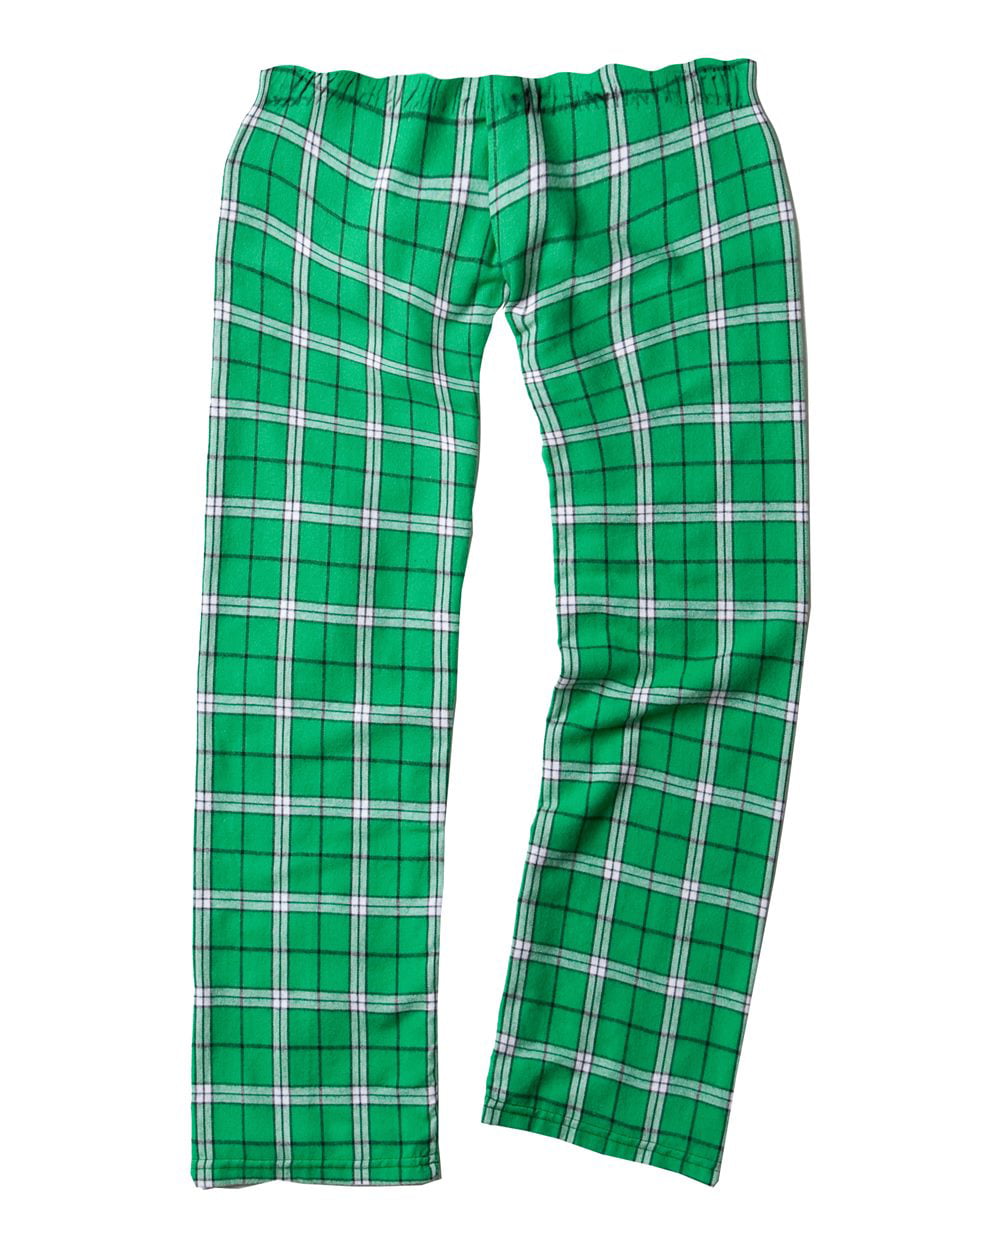 Buy > boxercraft flannel pants size chart > in stock